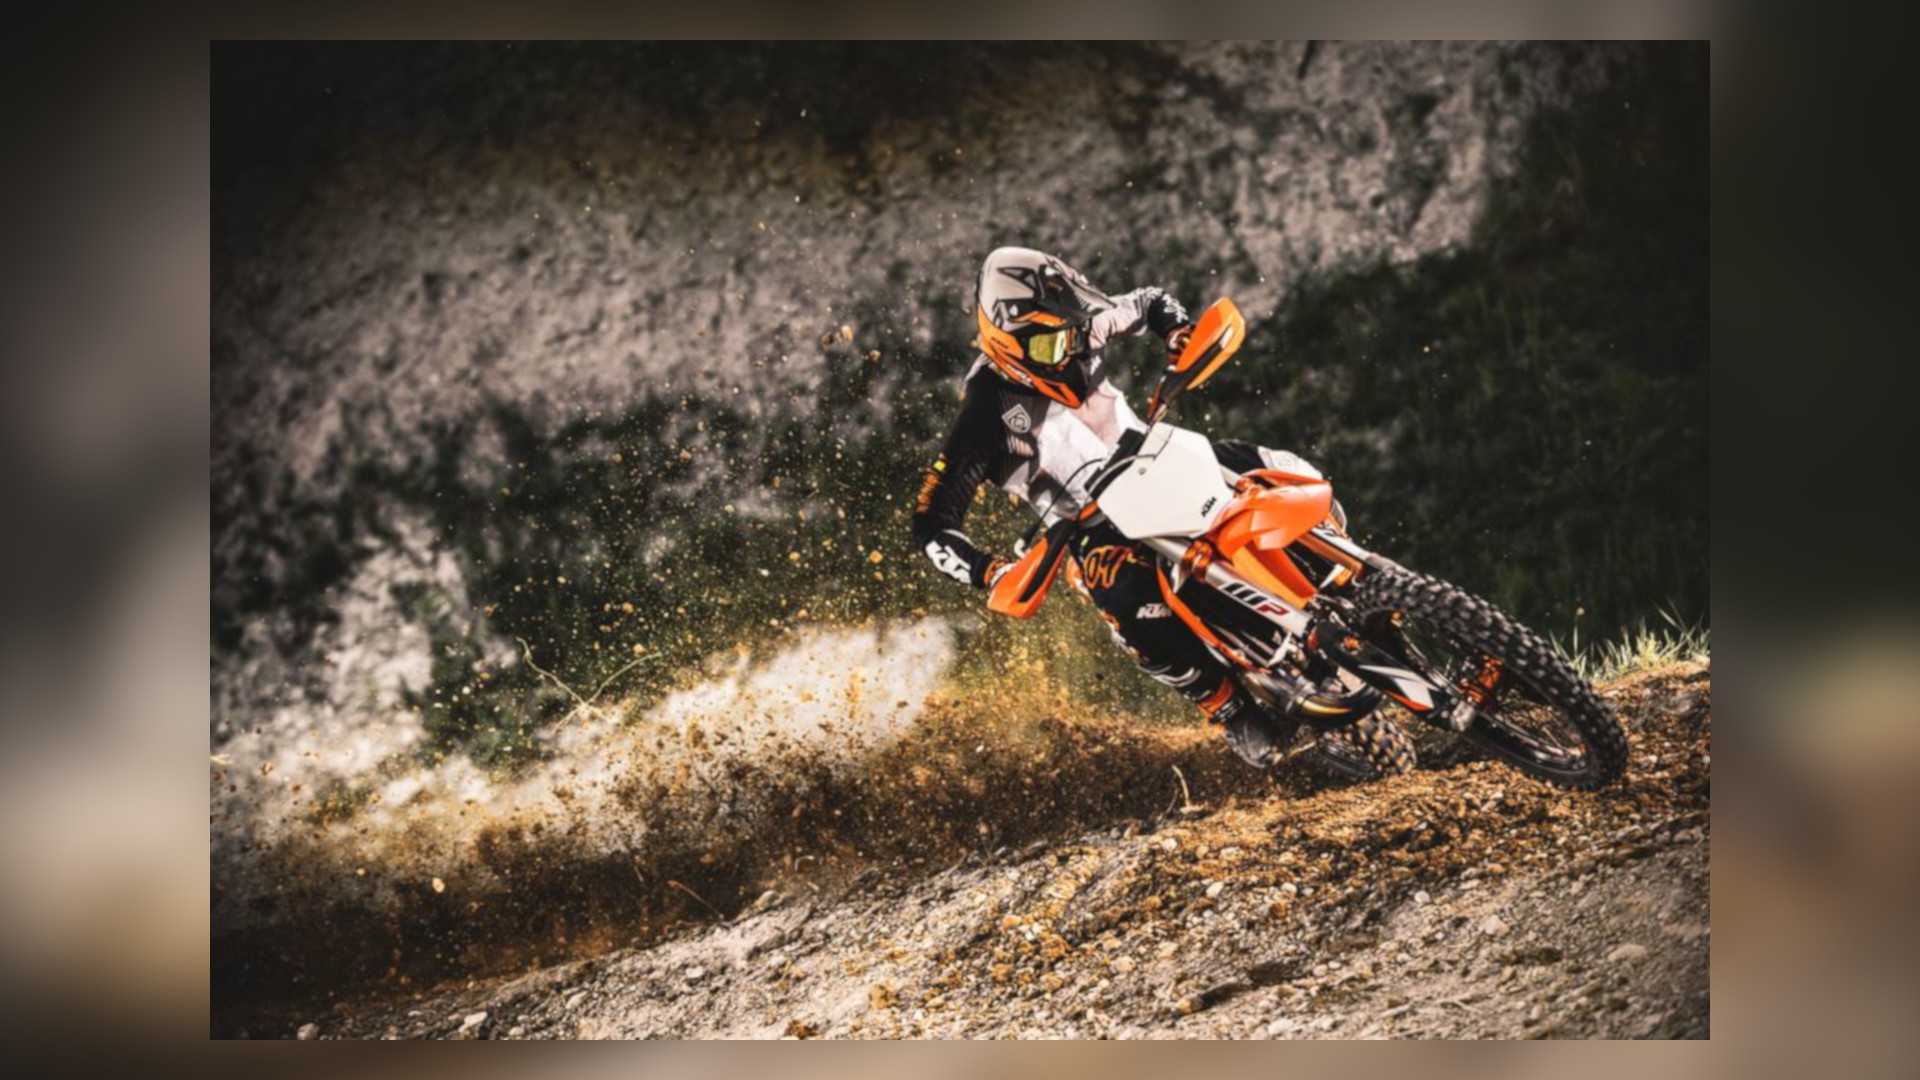 Ktm Sx Range Launched And Ready To Send Riders Skyward